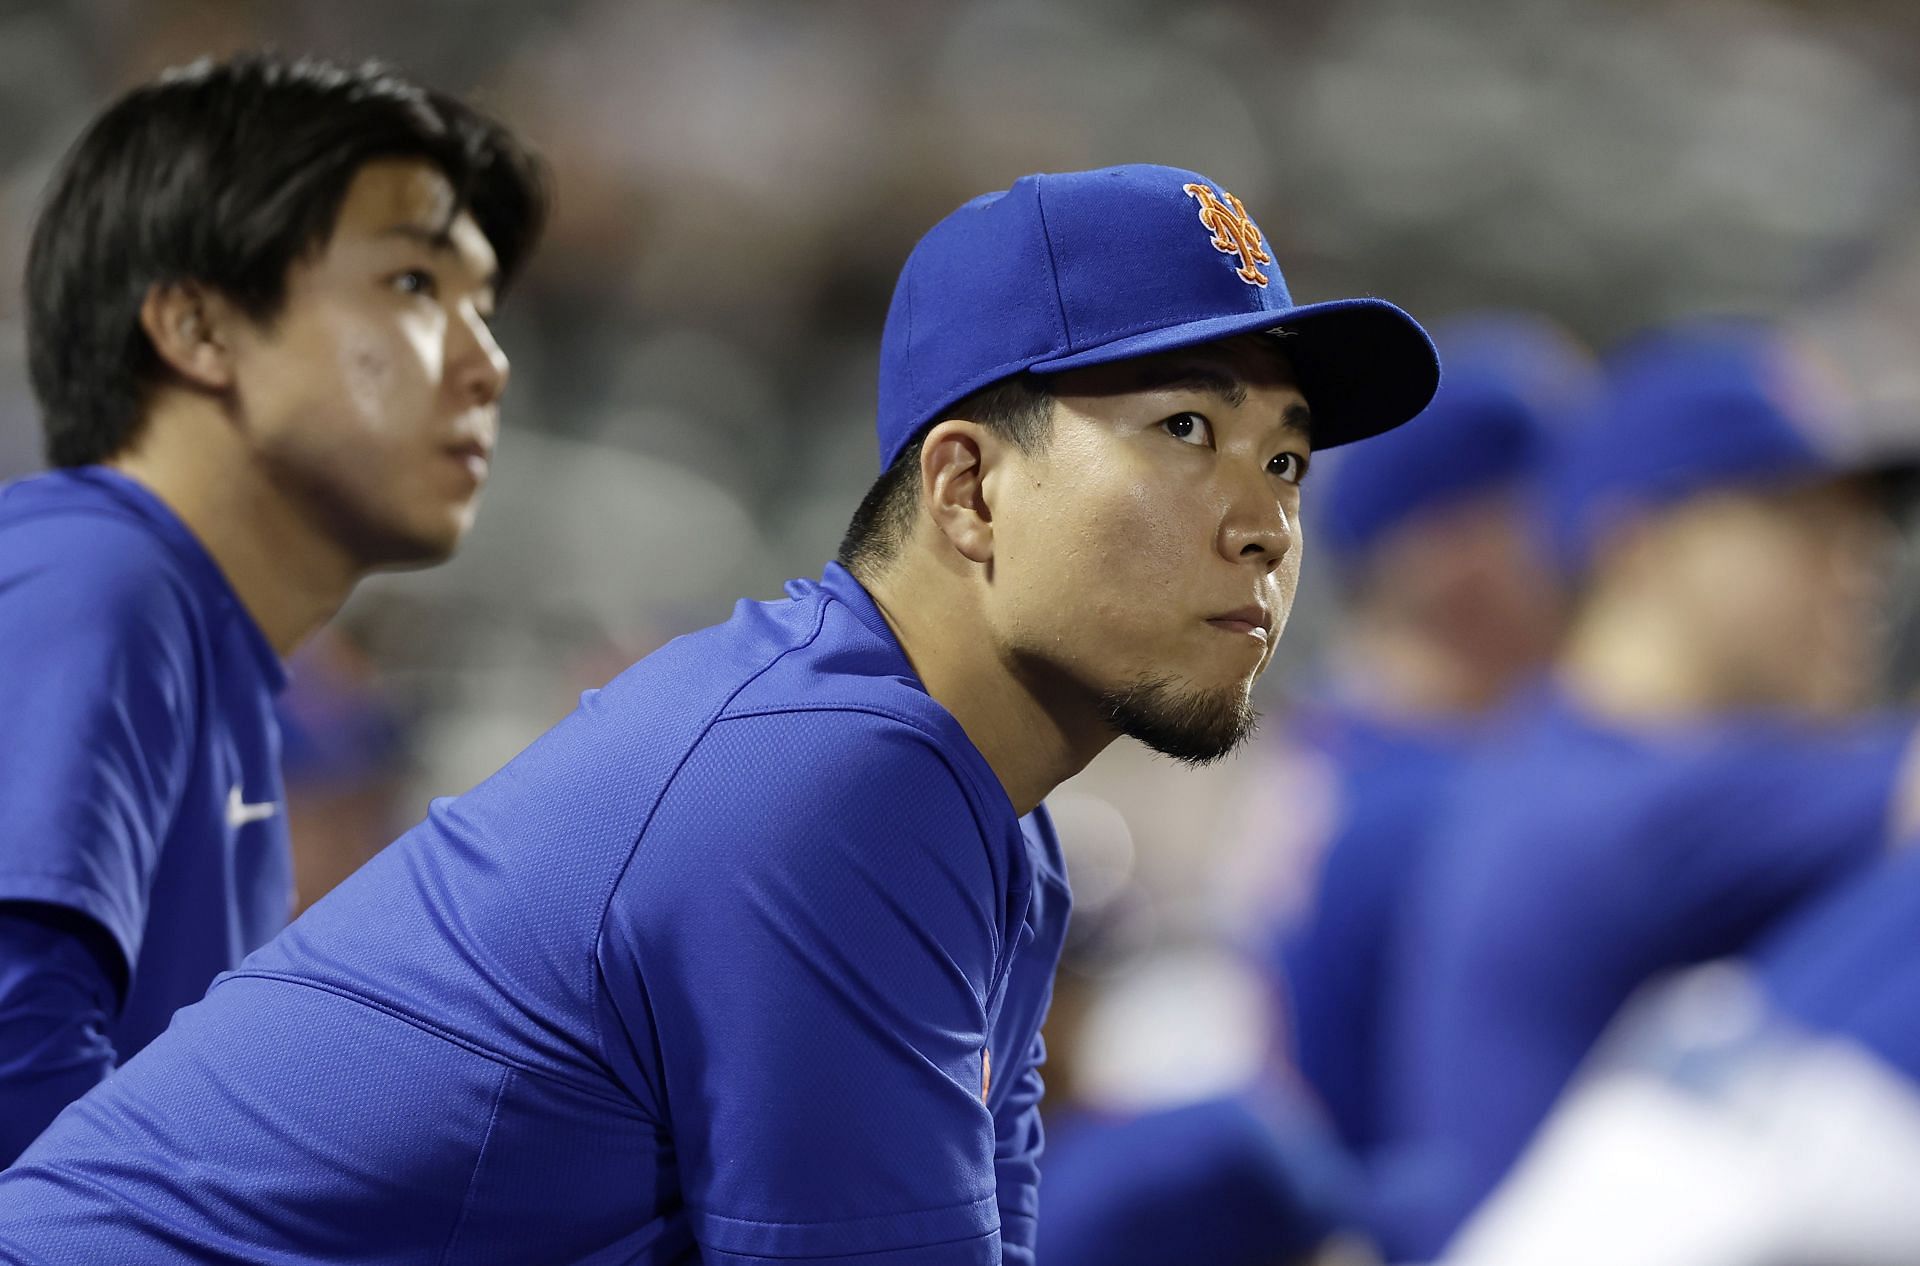 Kodai Senga of the New York Mets looks on from the dugout during the eighth inning against the Milwaukee Brewers at Citi Field on Monday in New York City.